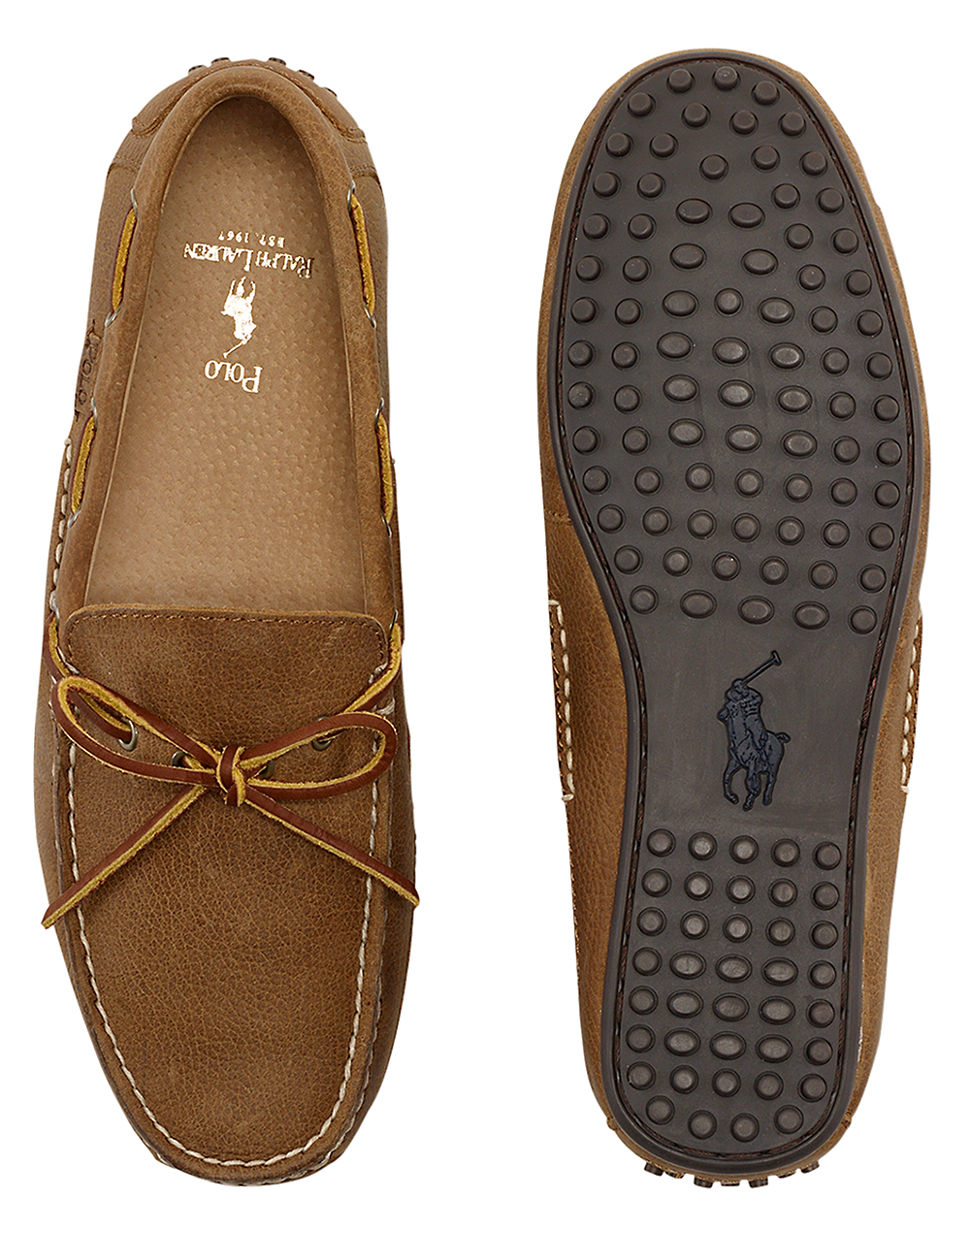 Polo Ralph Lauren Wydnings Leather Moccasins in Tan (Brown) for Men - Lyst